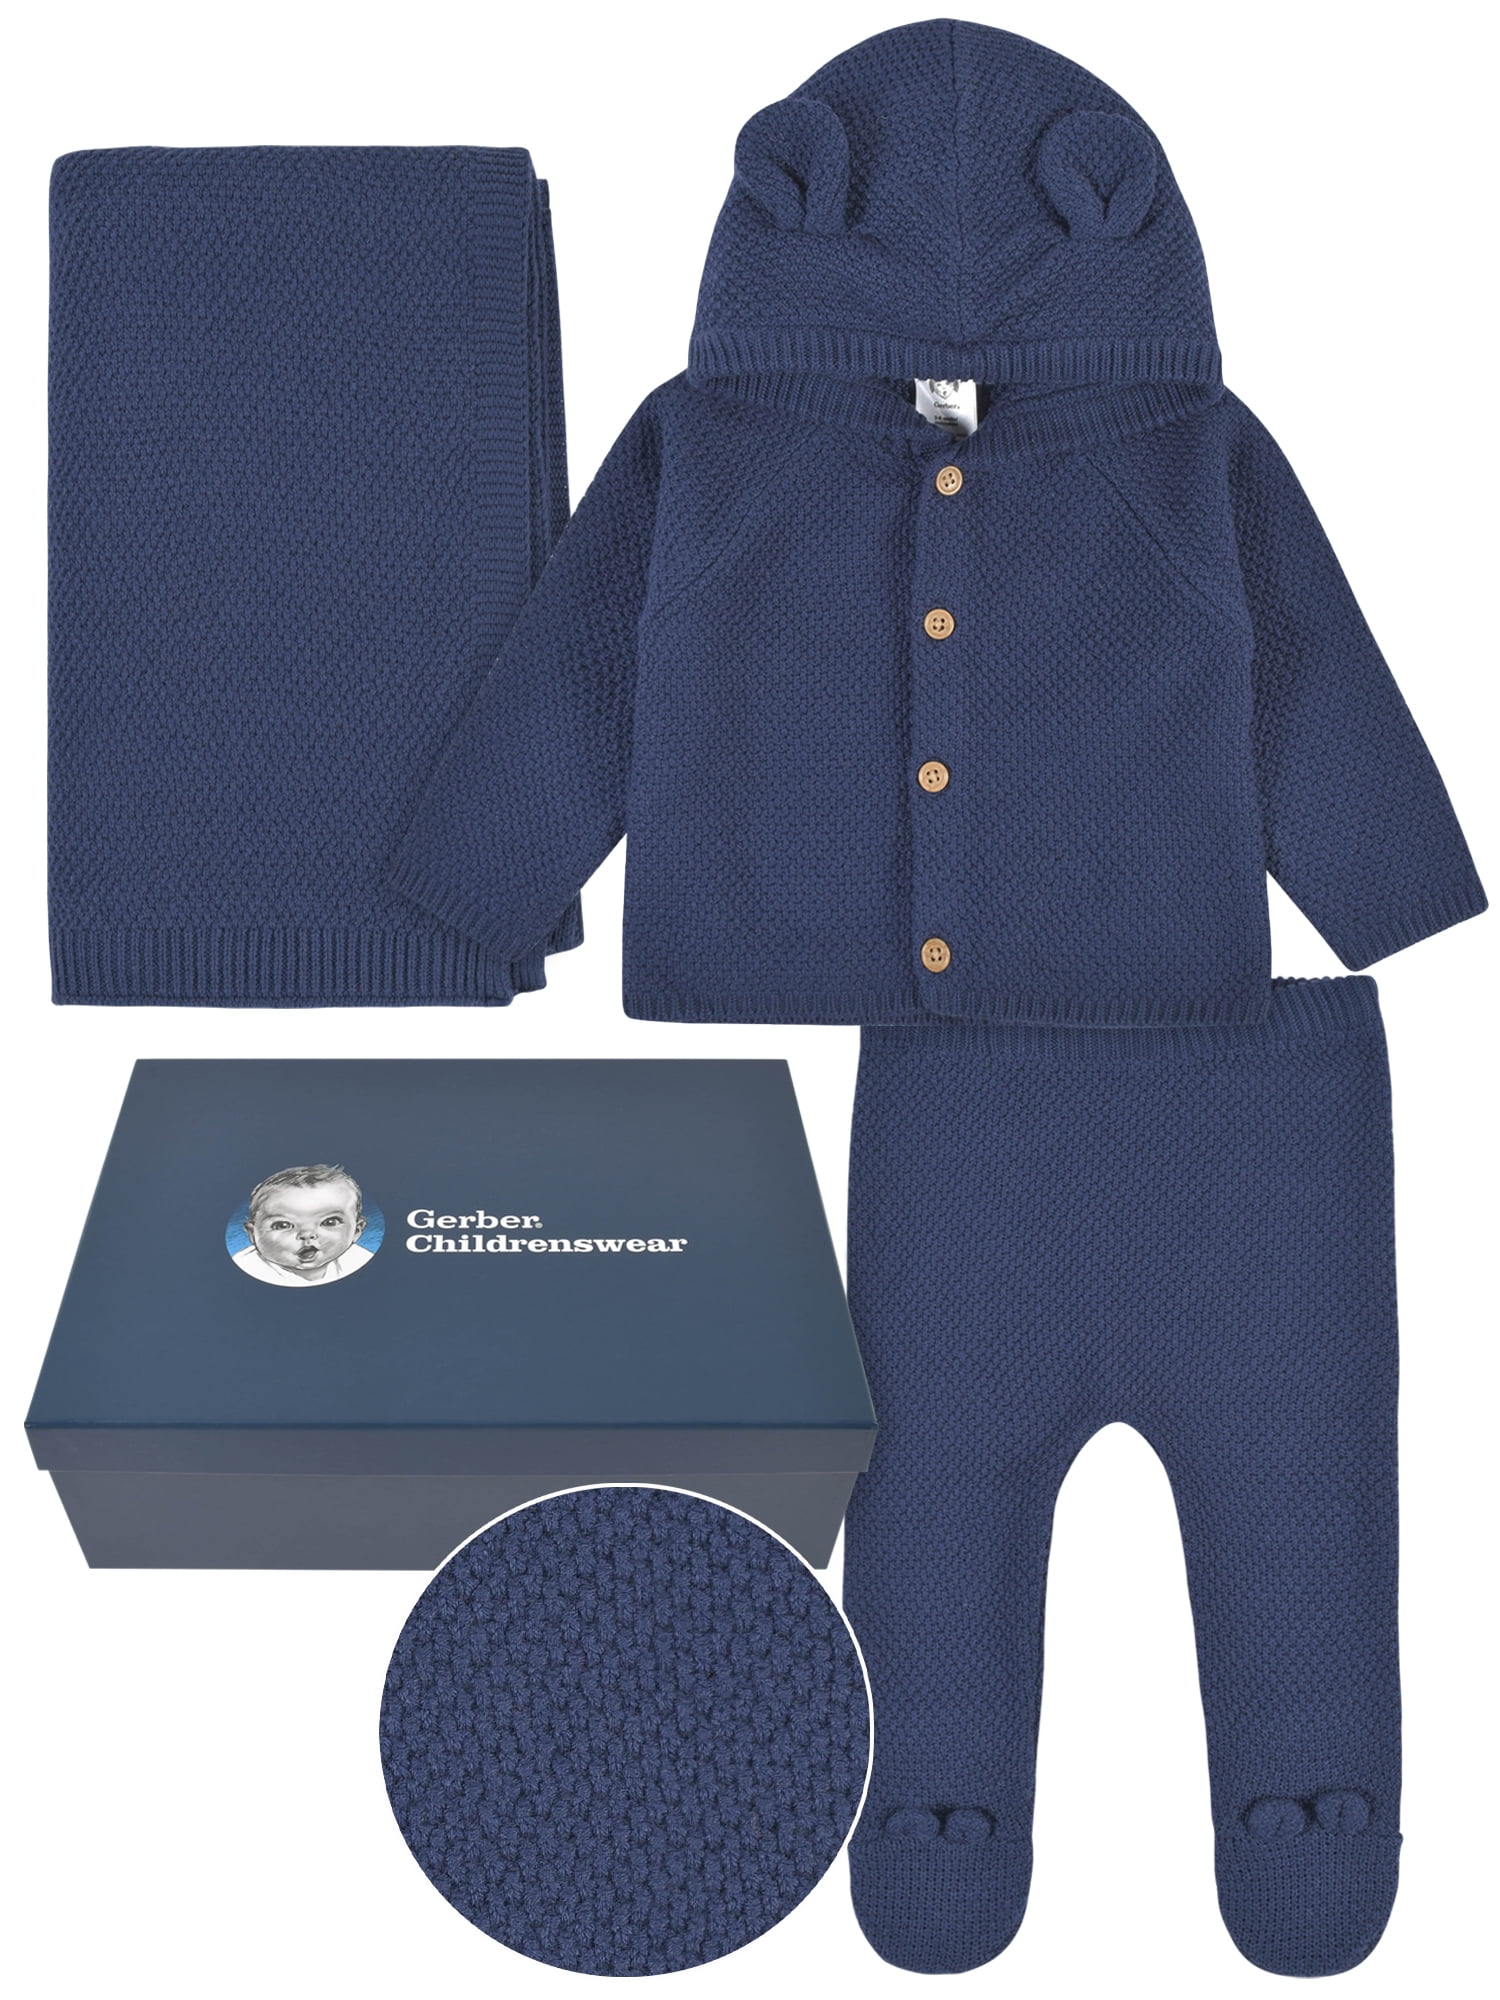 3-Piece Gerber Baby Gift Set: Hooded Sweater, Pants & Blanket + Gift Box (Blue) $14.70 + Free S&H w/ Walmart+ or $35+